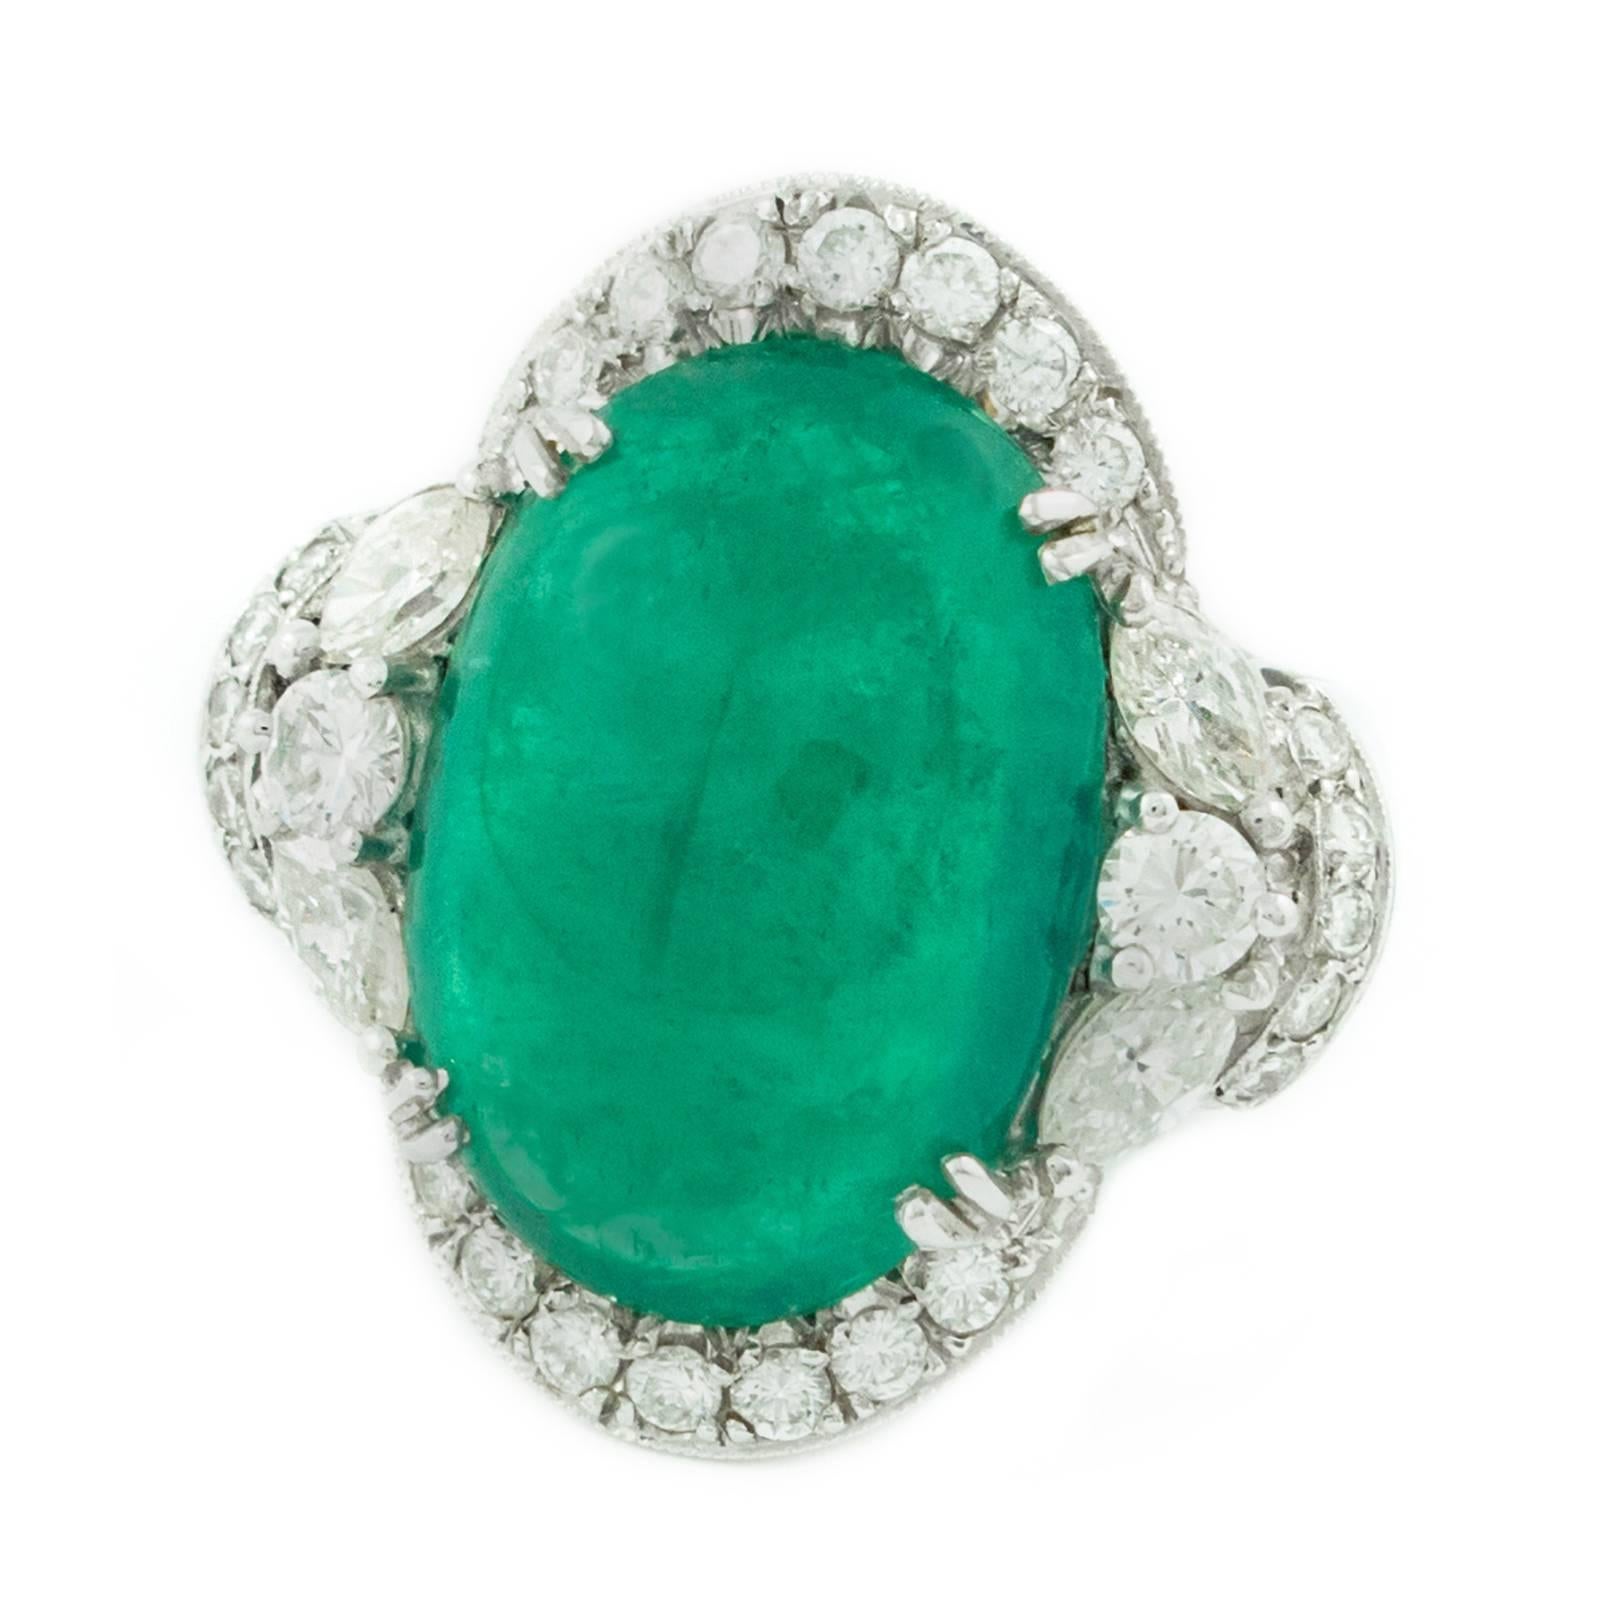 12.17 Carat Colombian Cabochon Cut Emerald Diamond White Gold Ring  In Excellent Condition For Sale In Toronto, Ontario